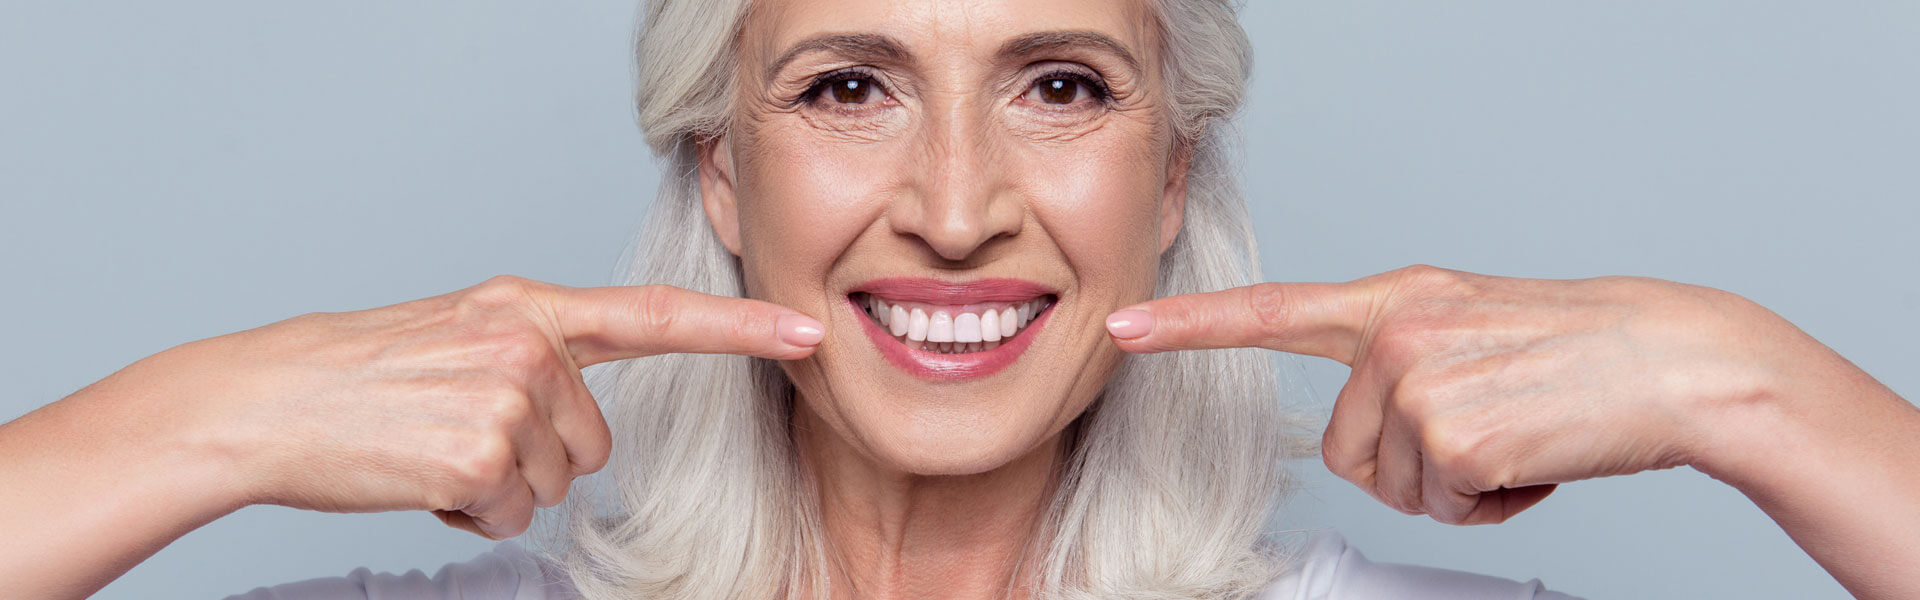 Worried About Your Teeth? It’s Never Too Late for Good Oral Health in Chandler